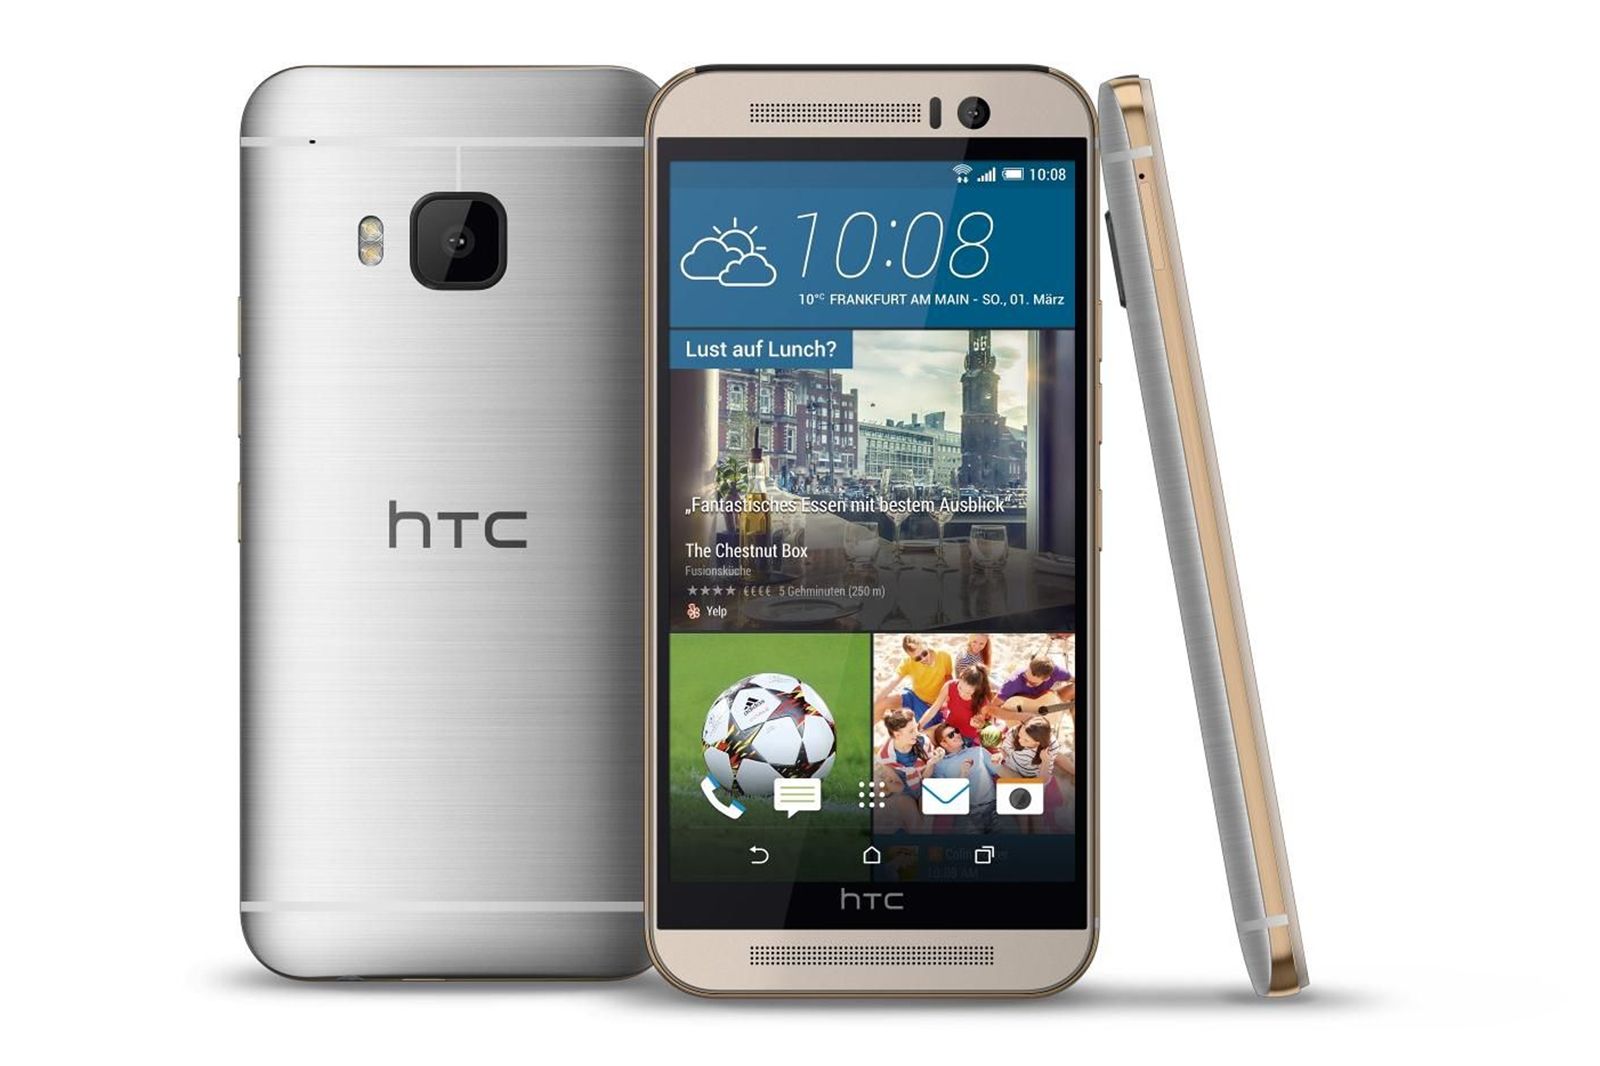 htc one m9 what to expect during mwc 2015 press event image 1